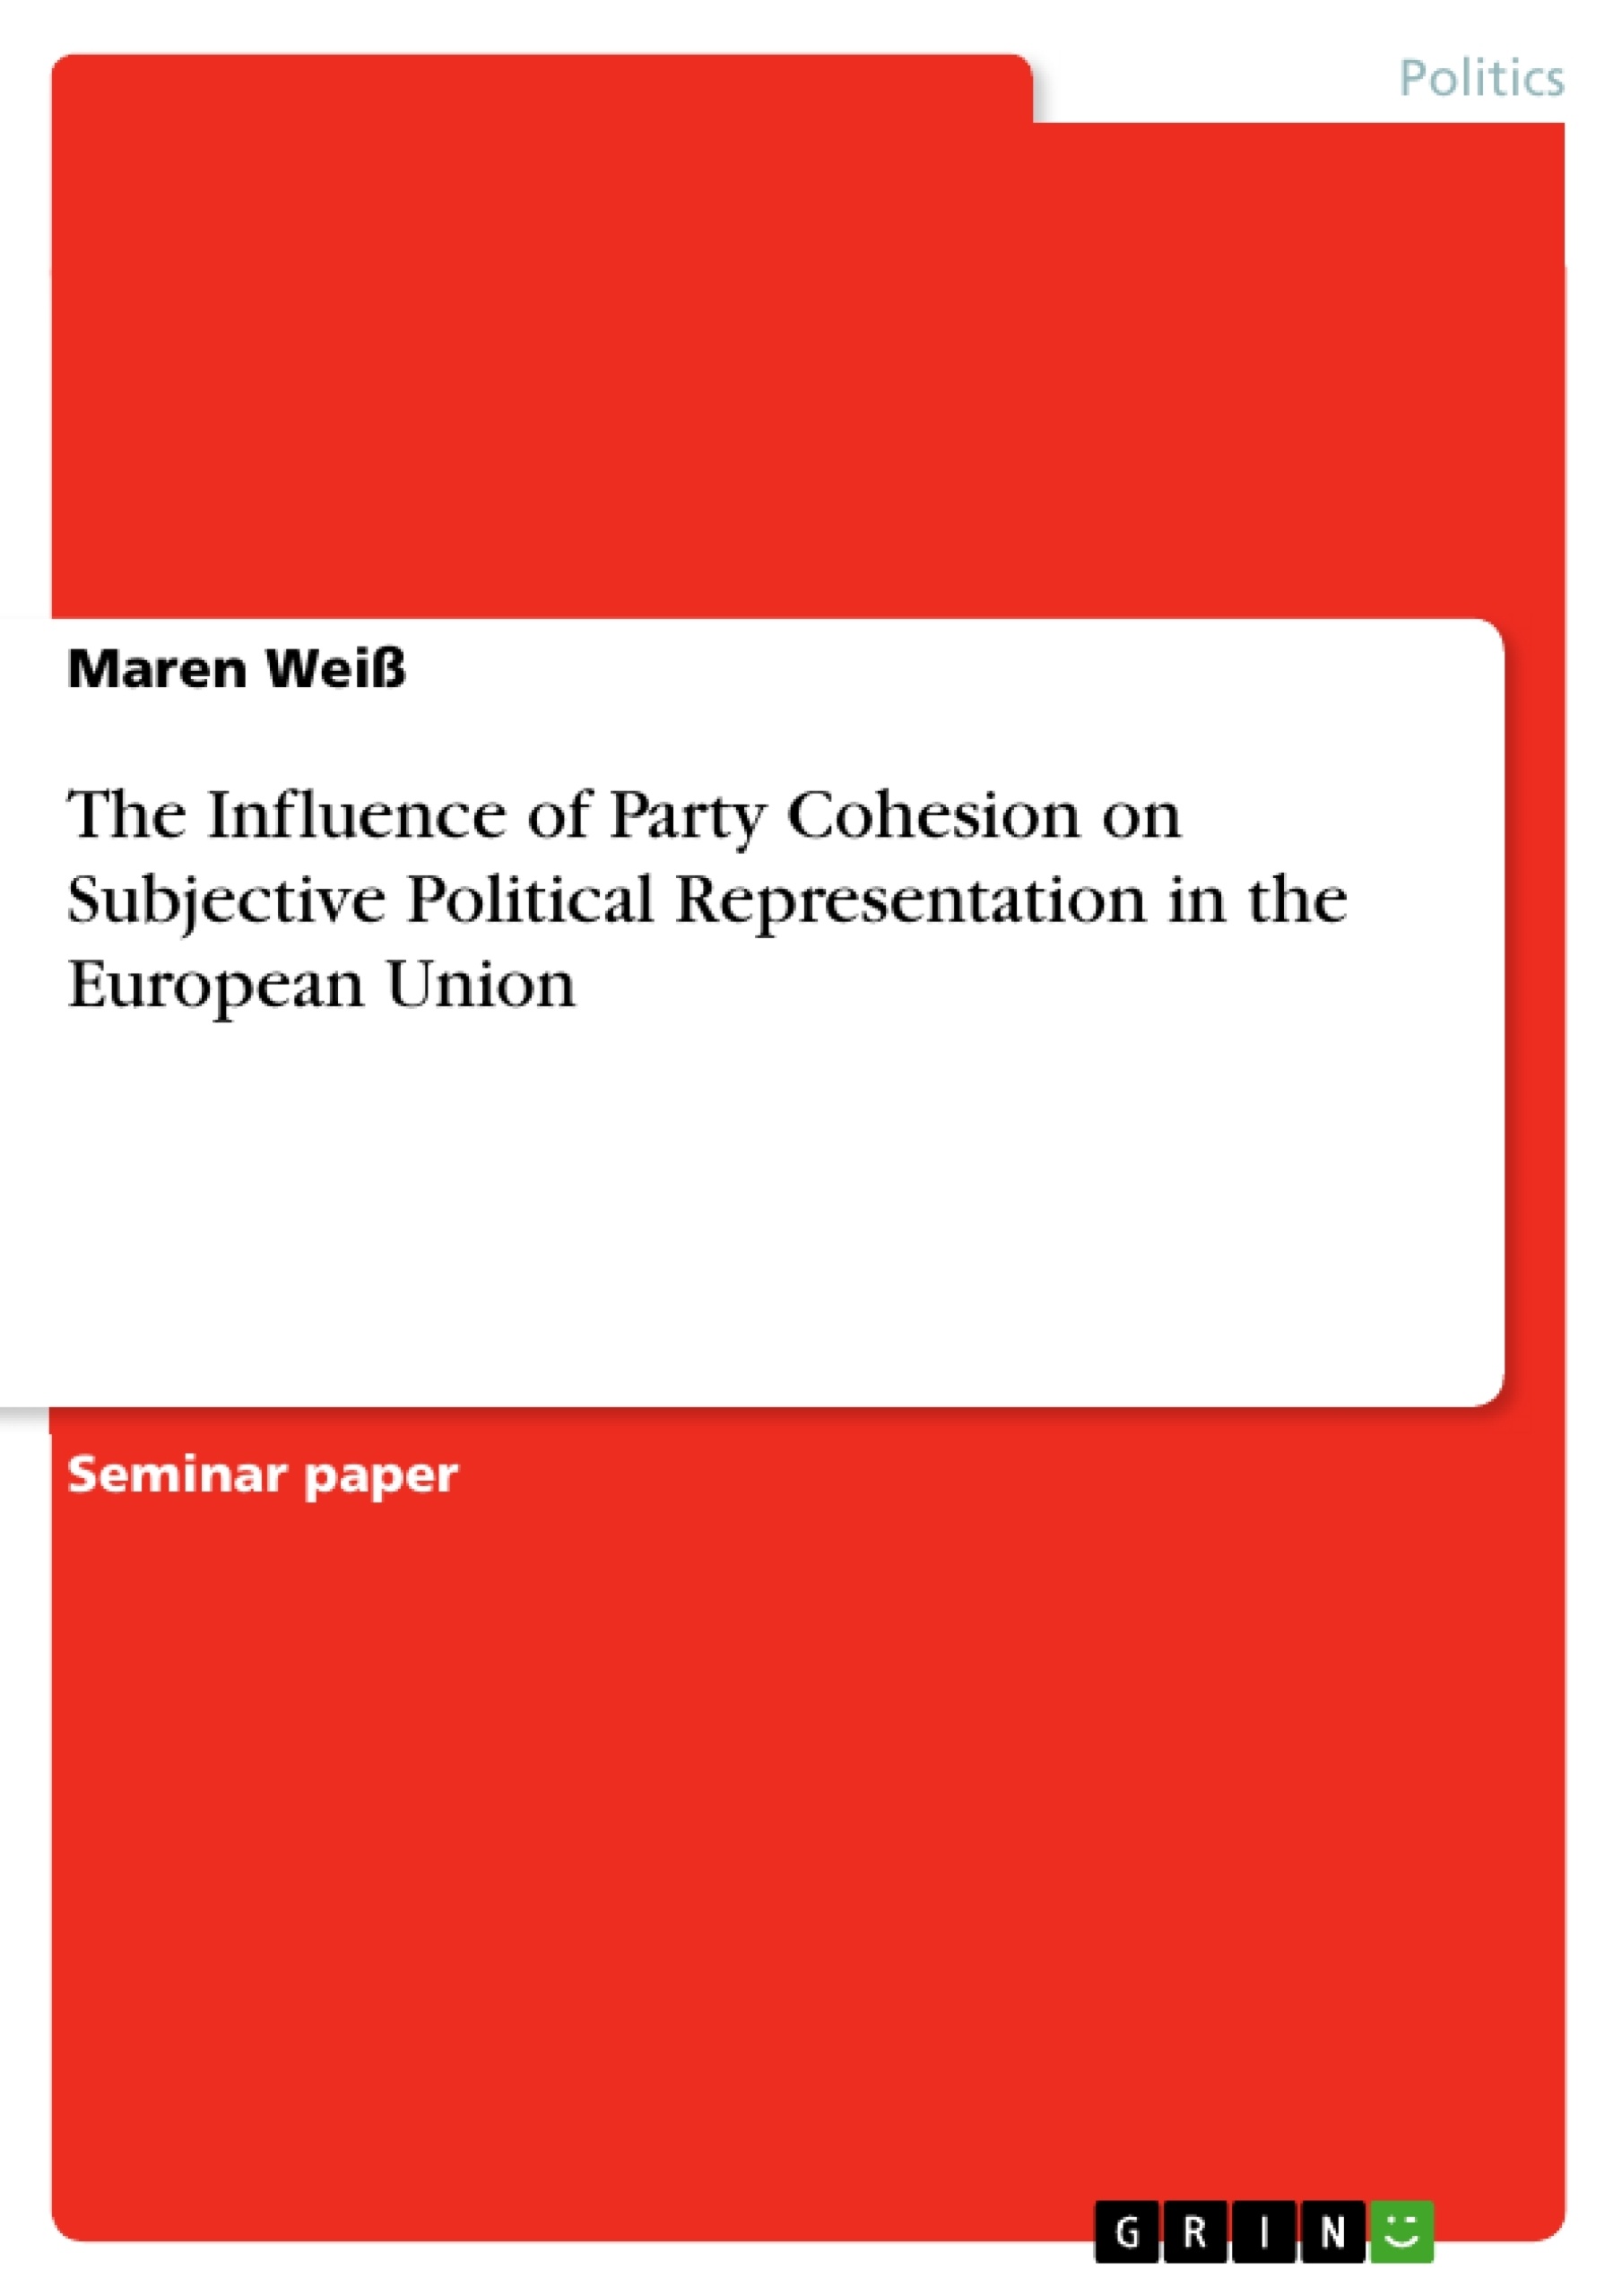 Título: The Influence of Party Cohesion on Subjective Political Representation in the European Union